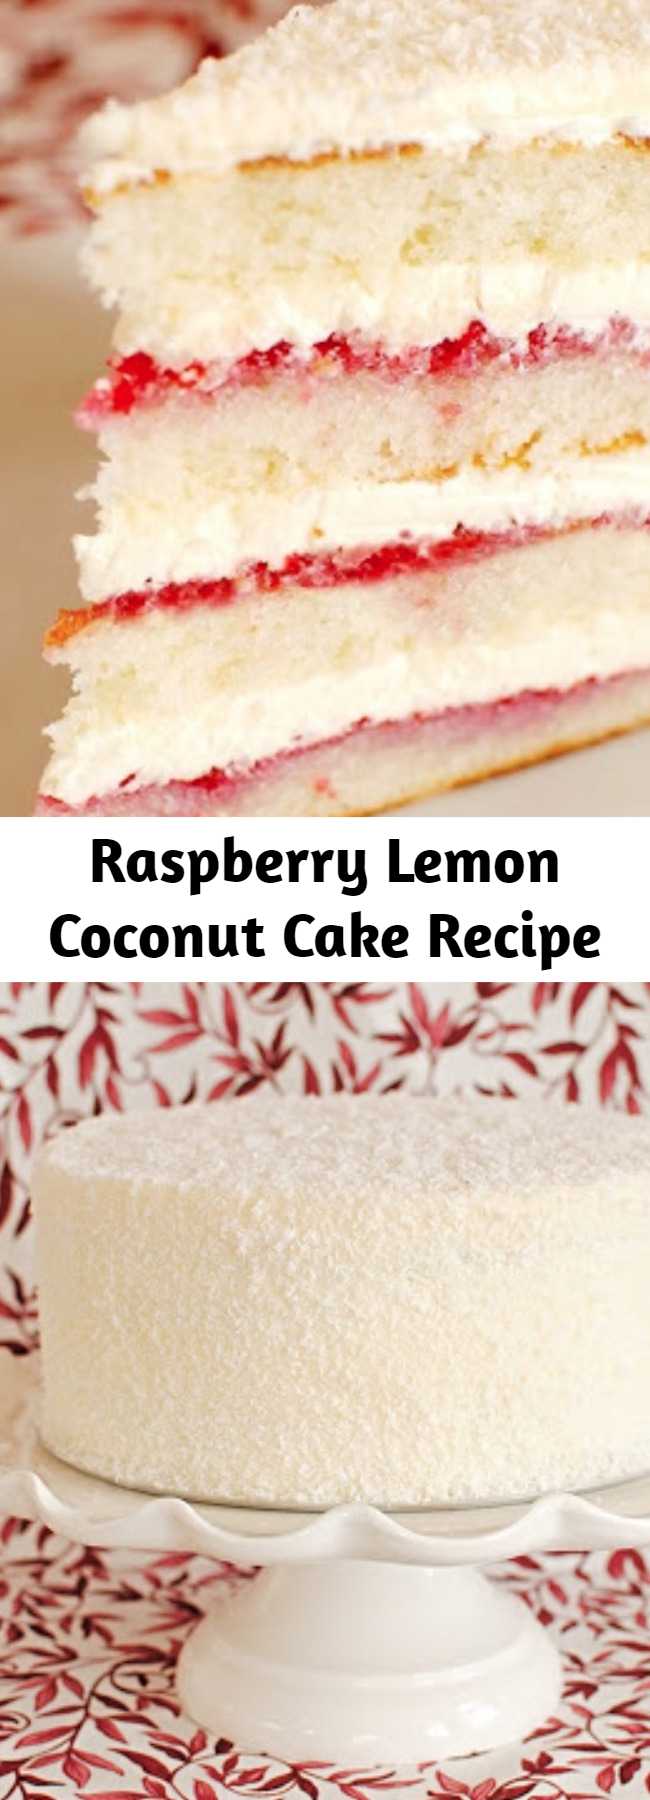 Raspberry Lemon Coconut Cake Recipe - This cake wasn't too fussy--well relatively, we are talking about a layer cake here--and it came together quickly and easily. Layers of raspberry preserves and lemon buttercream decorated simply with a little coconut. No piping tips needed.